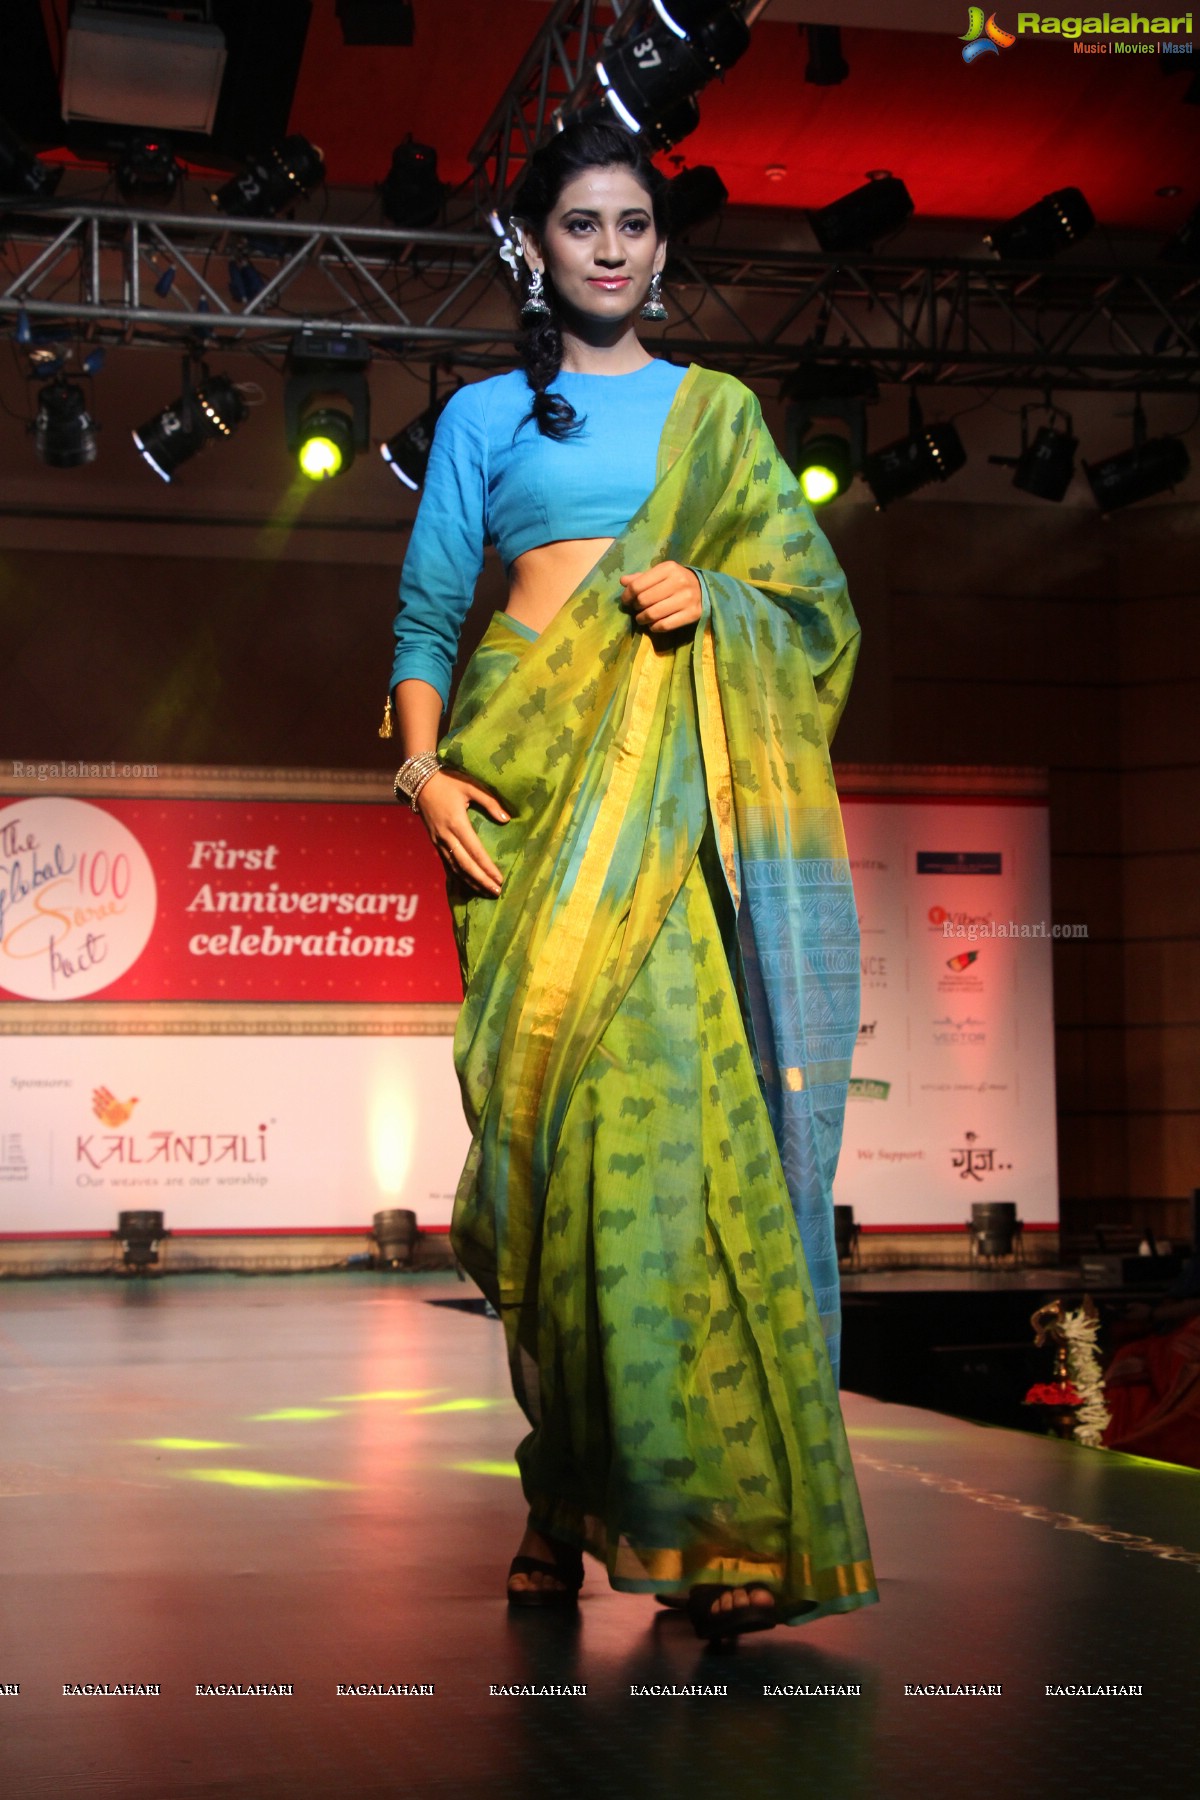 The Global 100 Sarees Pact Group First Anniversary Celebrations at Hyderabad Marriott Hotel and Convention Centre